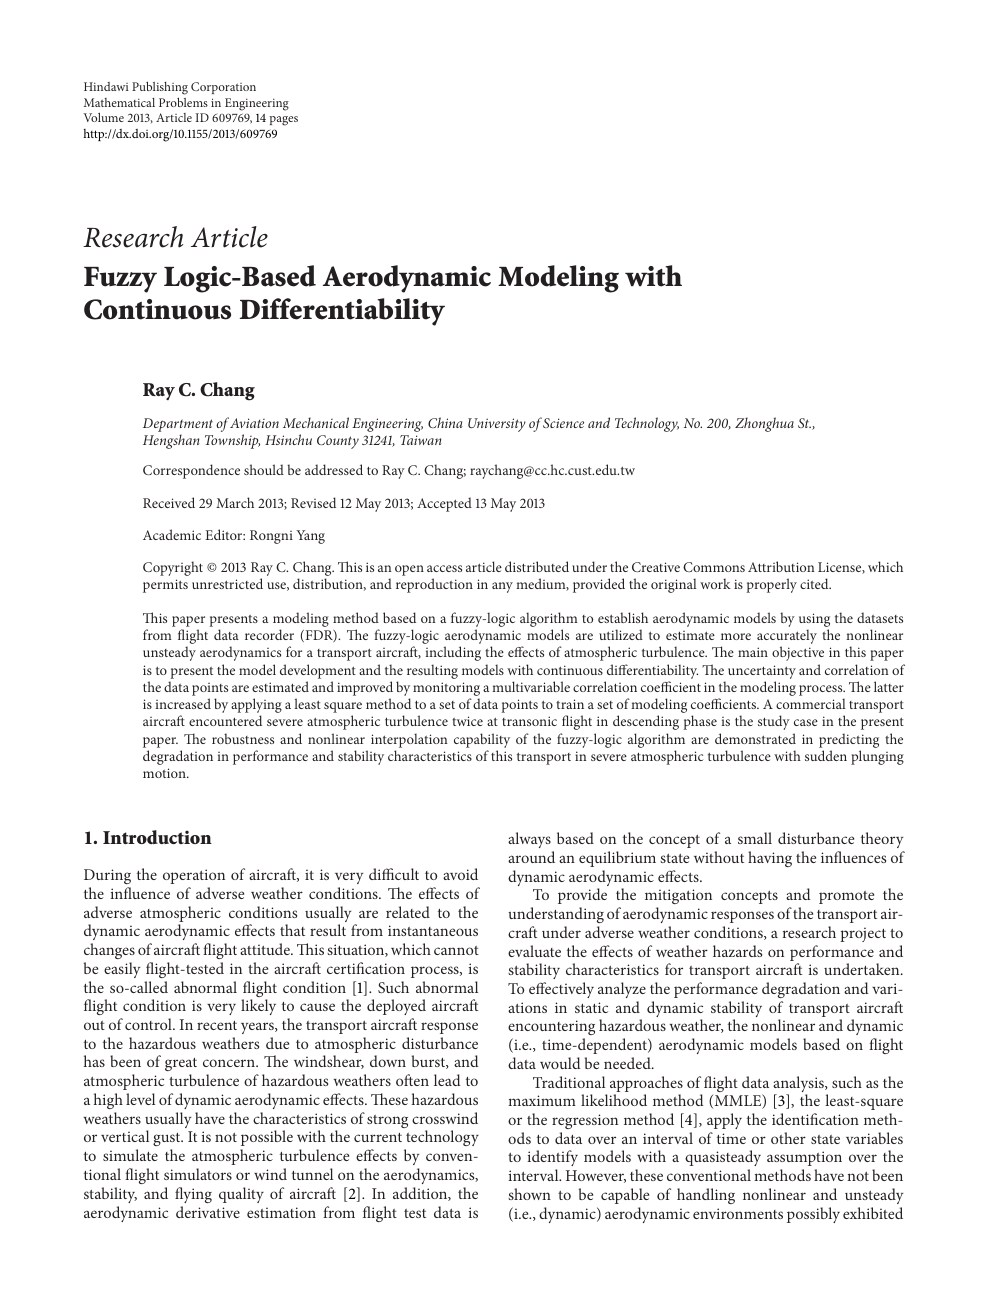 Fuzzy Logic Based Aerodynamic Modeling With Continuous Differentiability Topic Of Research Paper In Earth And Related Environmental Sciences Download Scholarly Article Pdf And Read For Free On Cyberleninka Open Science Hub